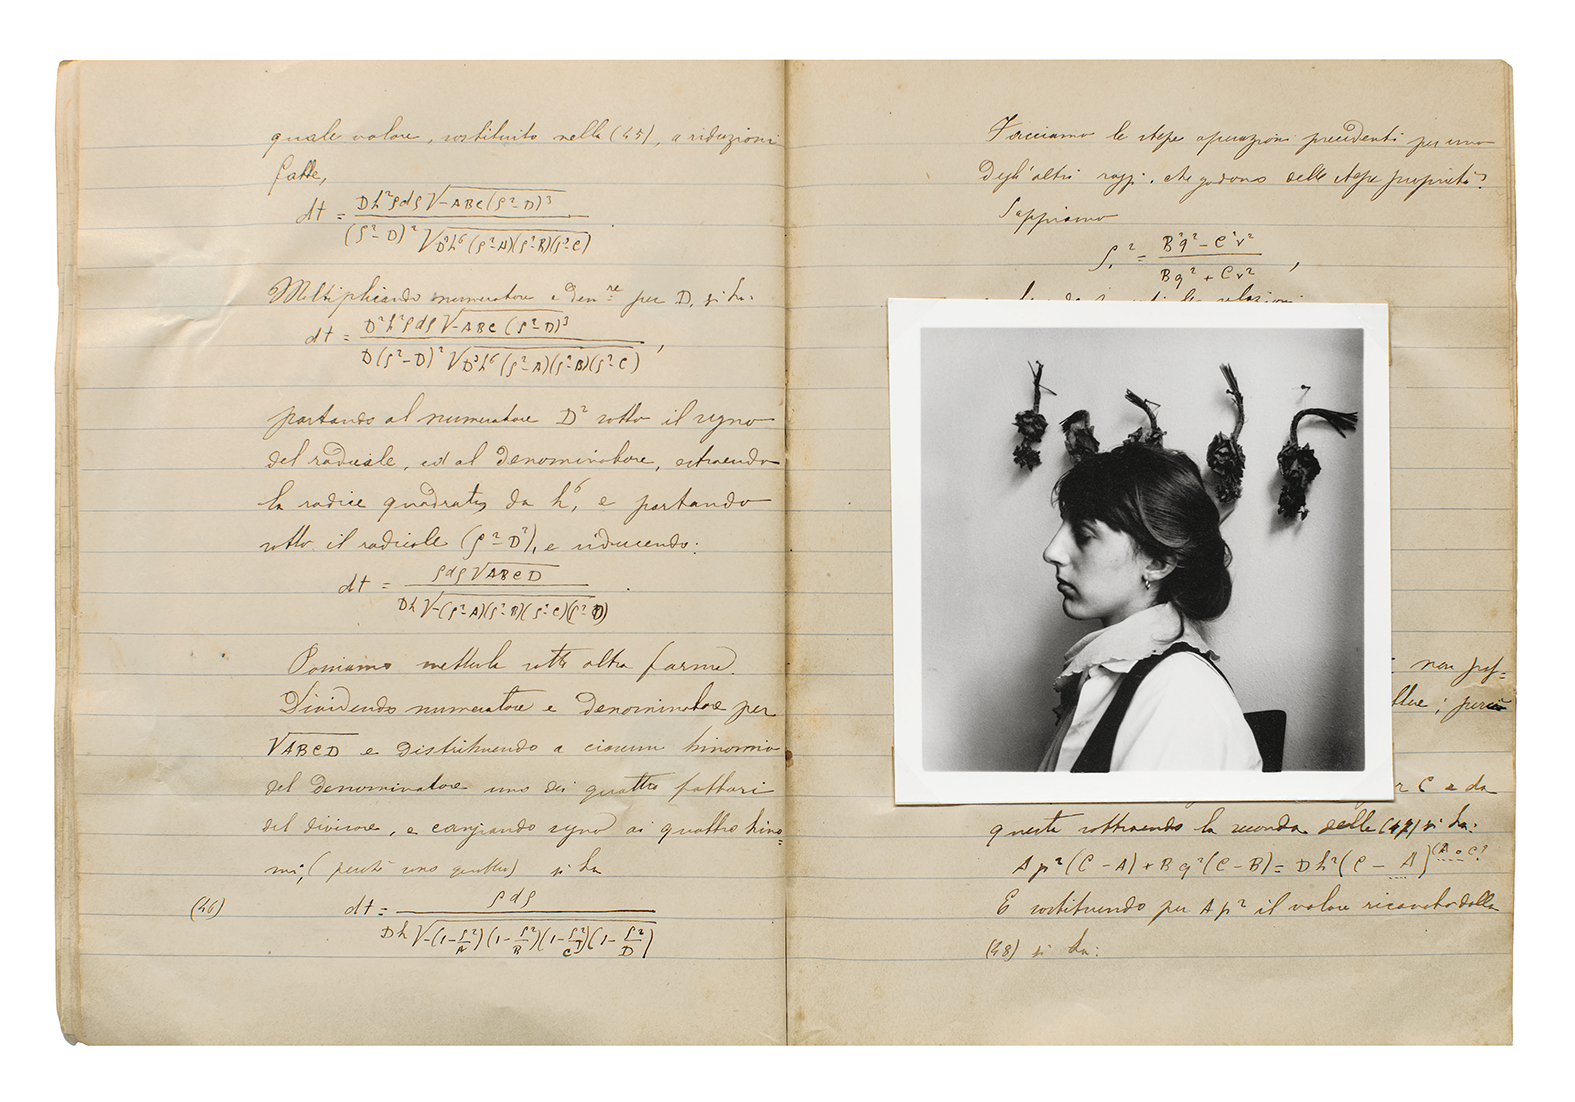 Double page spread of a lined notebook. On the right side page is a square, black and white photograph of a woman in profile, eyes closed, against a display of pinned up, dried flowers.